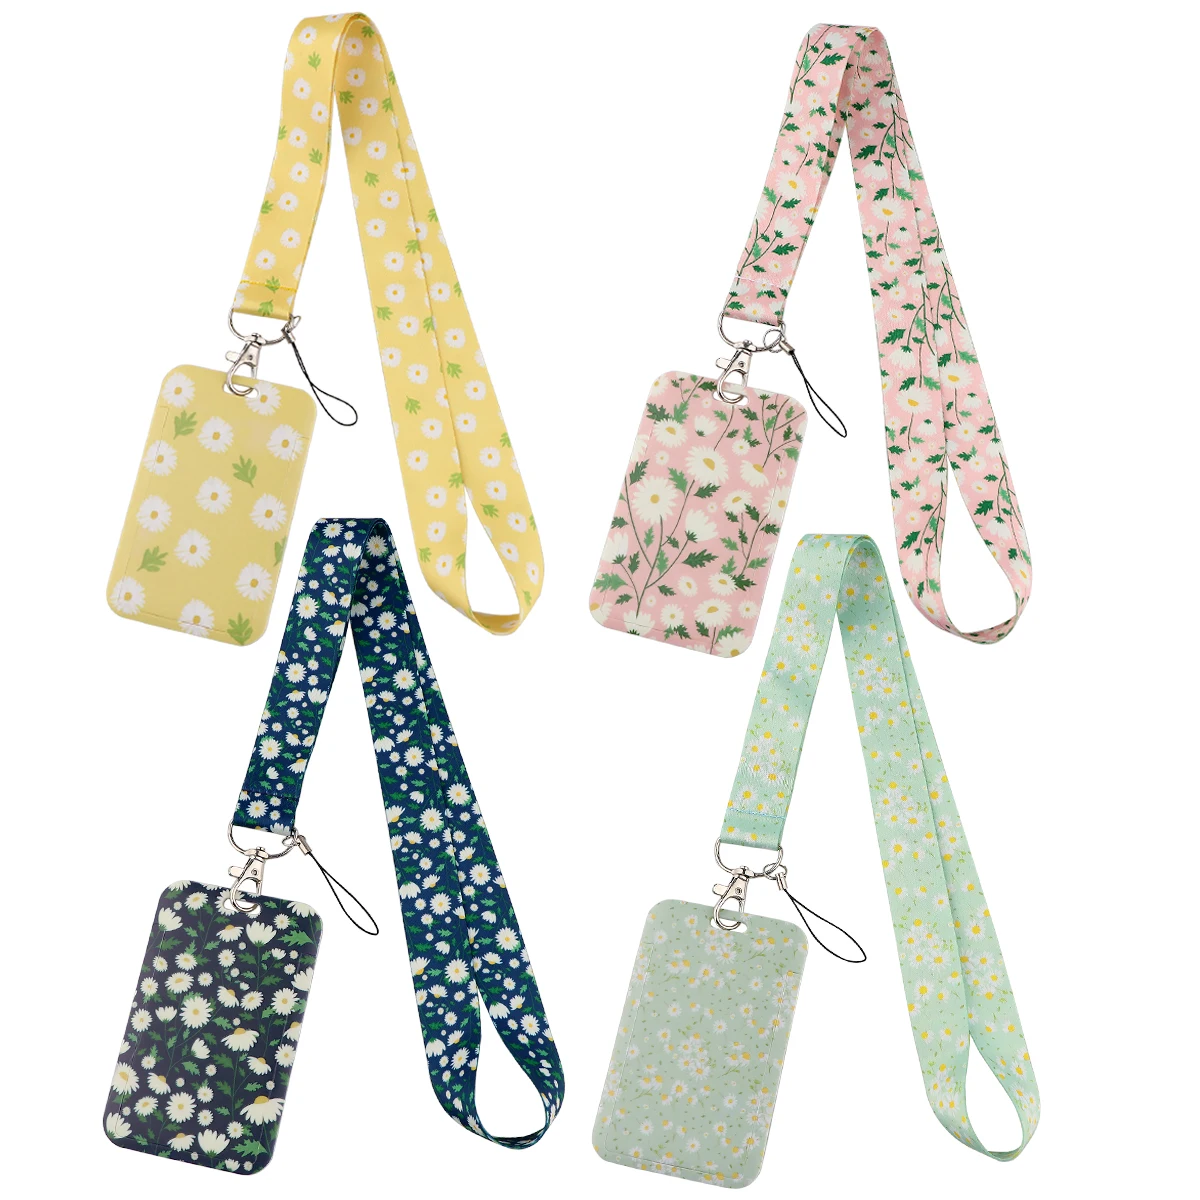 

Small Daisy Lanyards for Key Flowers Neck Strap For Card Badge Gym Keychain Lanyard Key Holder DIY Hanging Rope Phone Straps